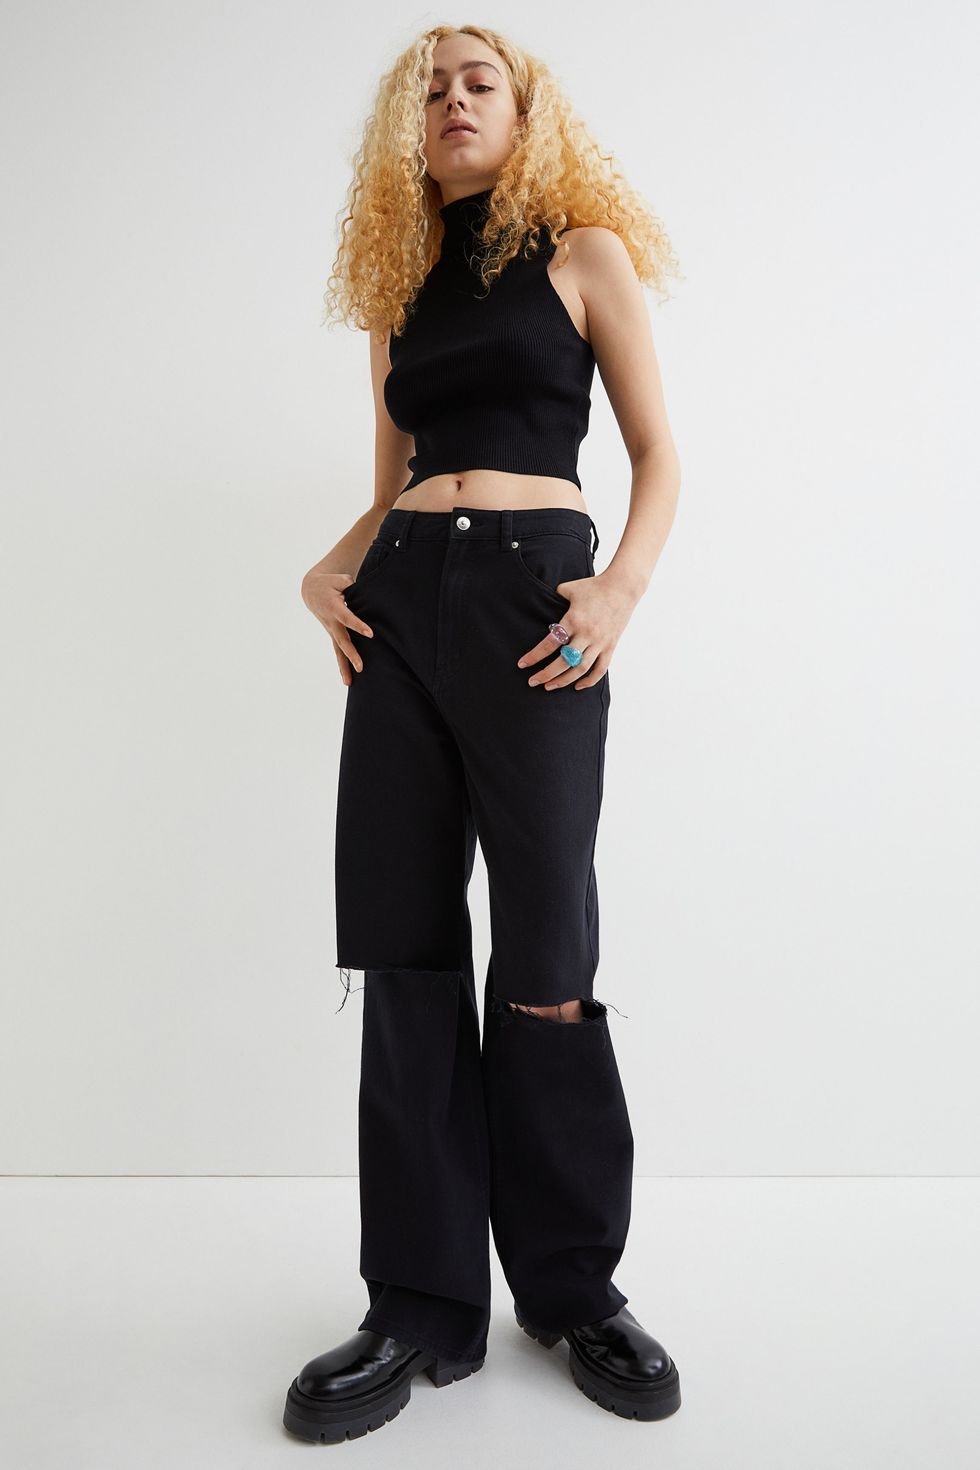 21 Cute Crop Top Outfit Ideas to Wear and Shop in 2023